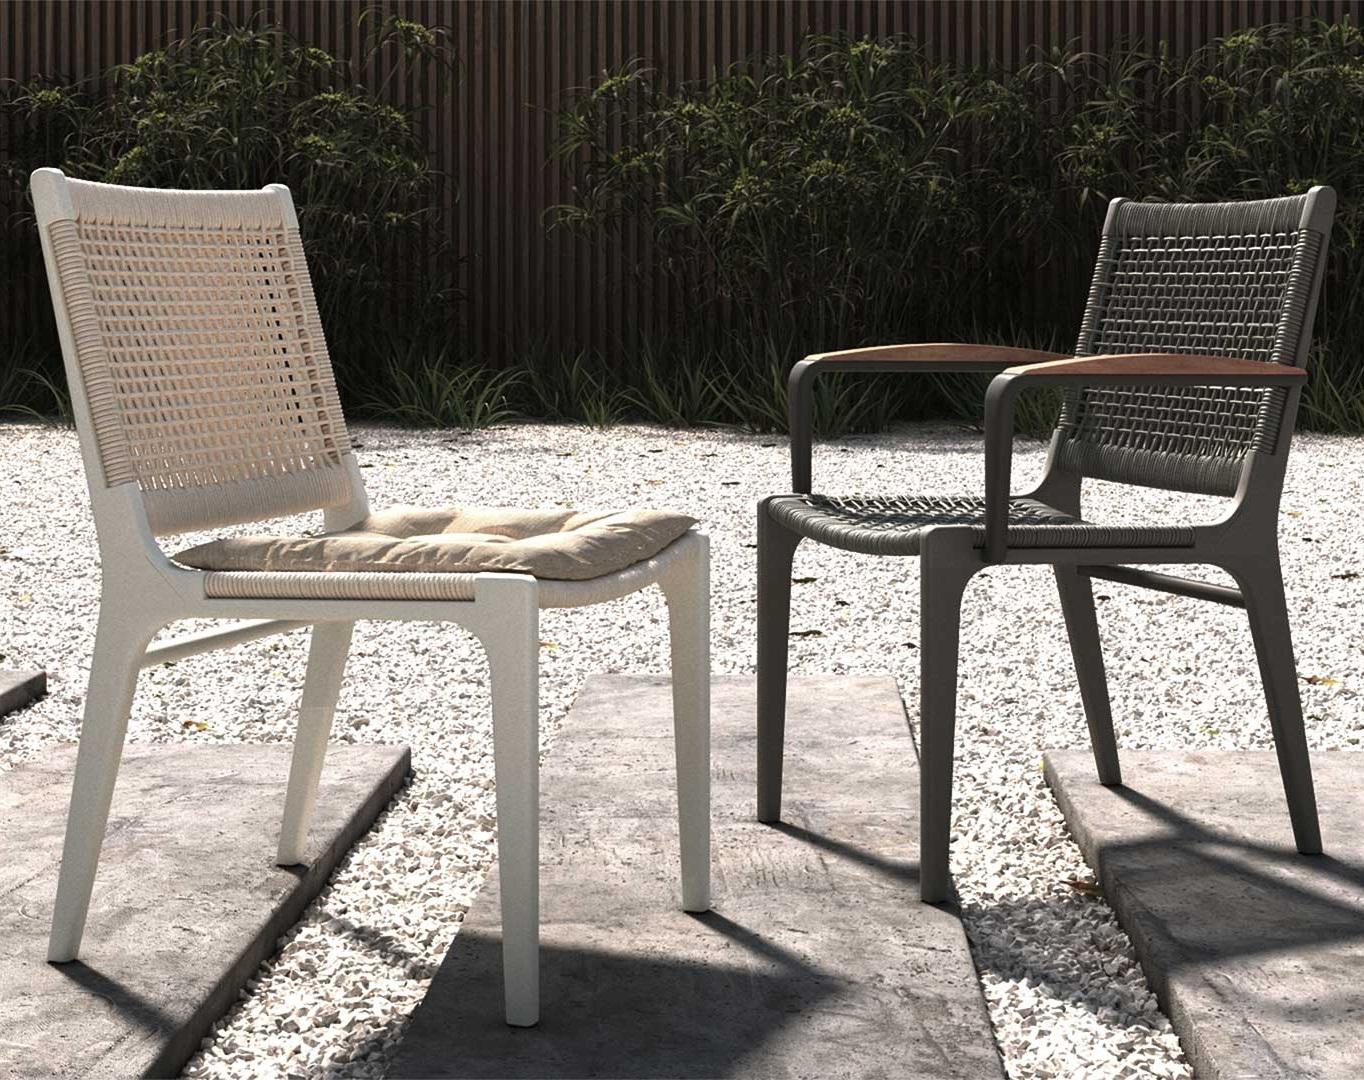 Modern and minimalist in design, this outdoor collection is timeless and carefully handcrafted by master-weavers in our own production facility. Our highest quality materials are recyclable, weather resistant to rain, frost, snow and are 100%